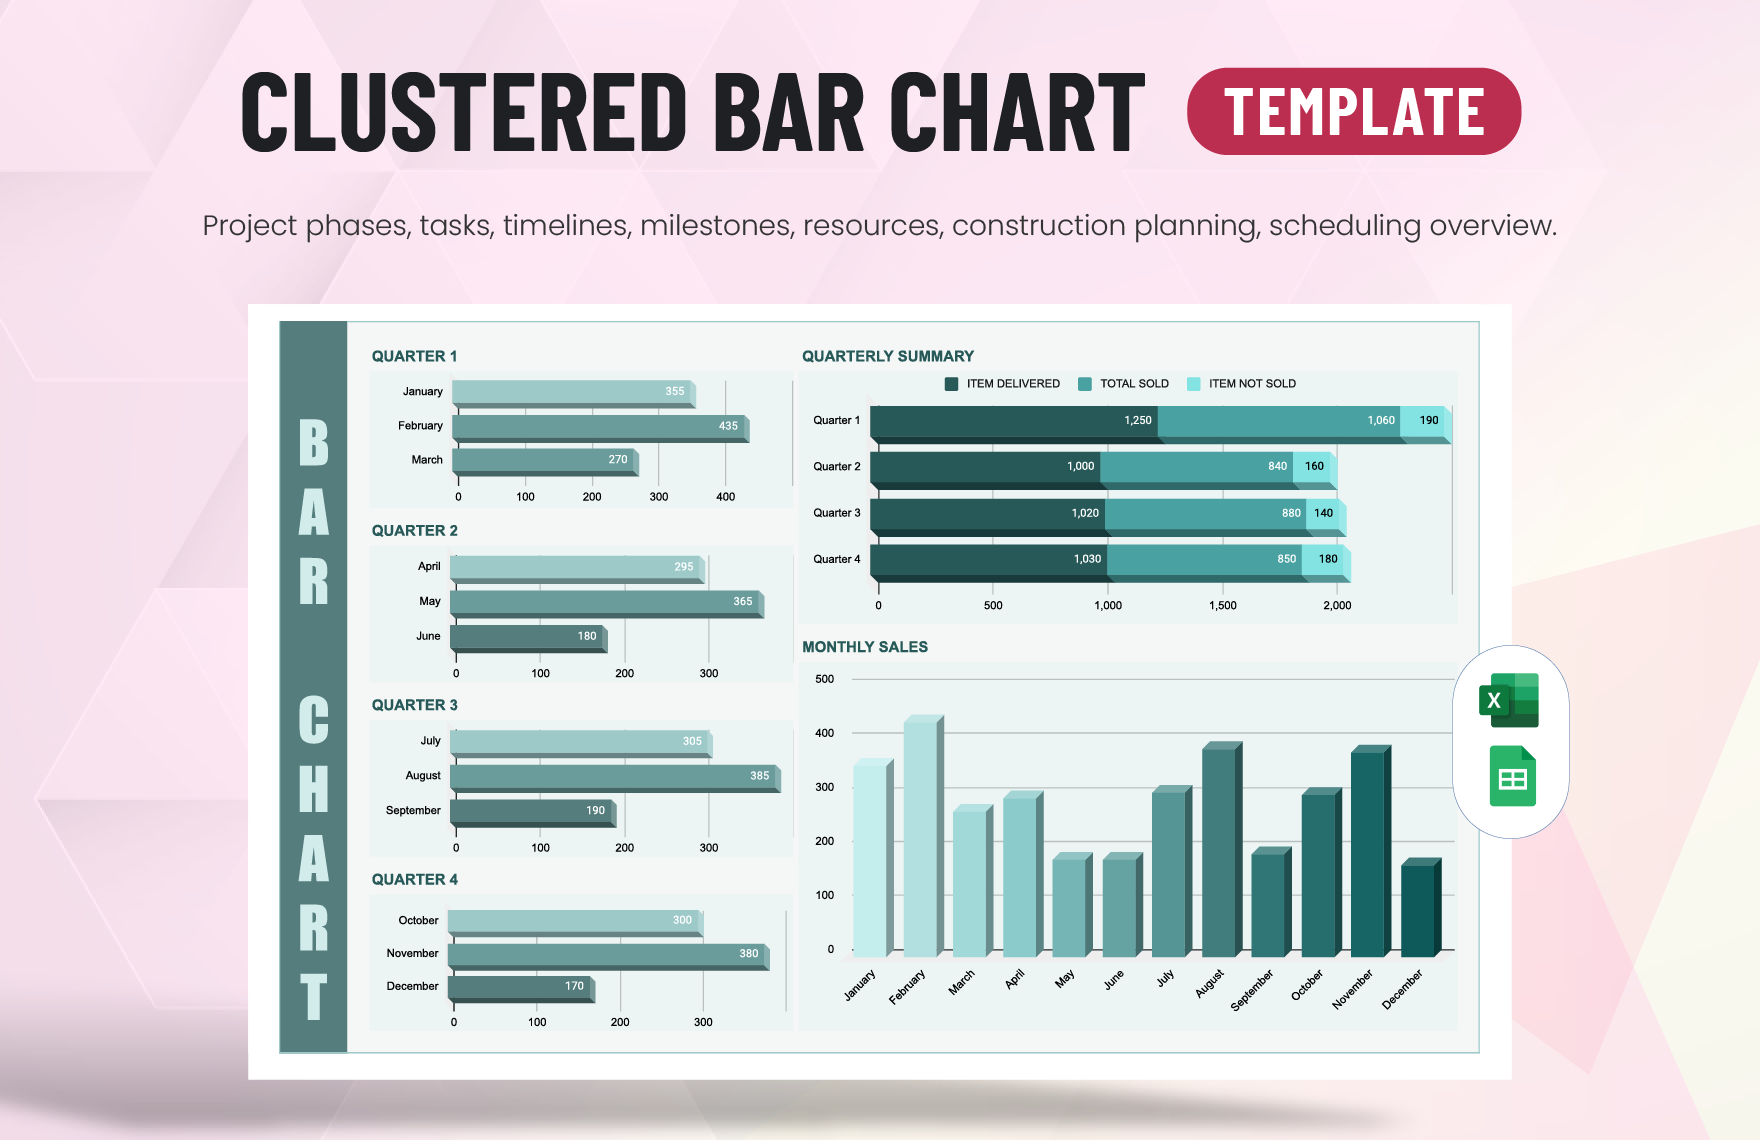 Clustered Bar Chart Template in Excel, Google Sheets